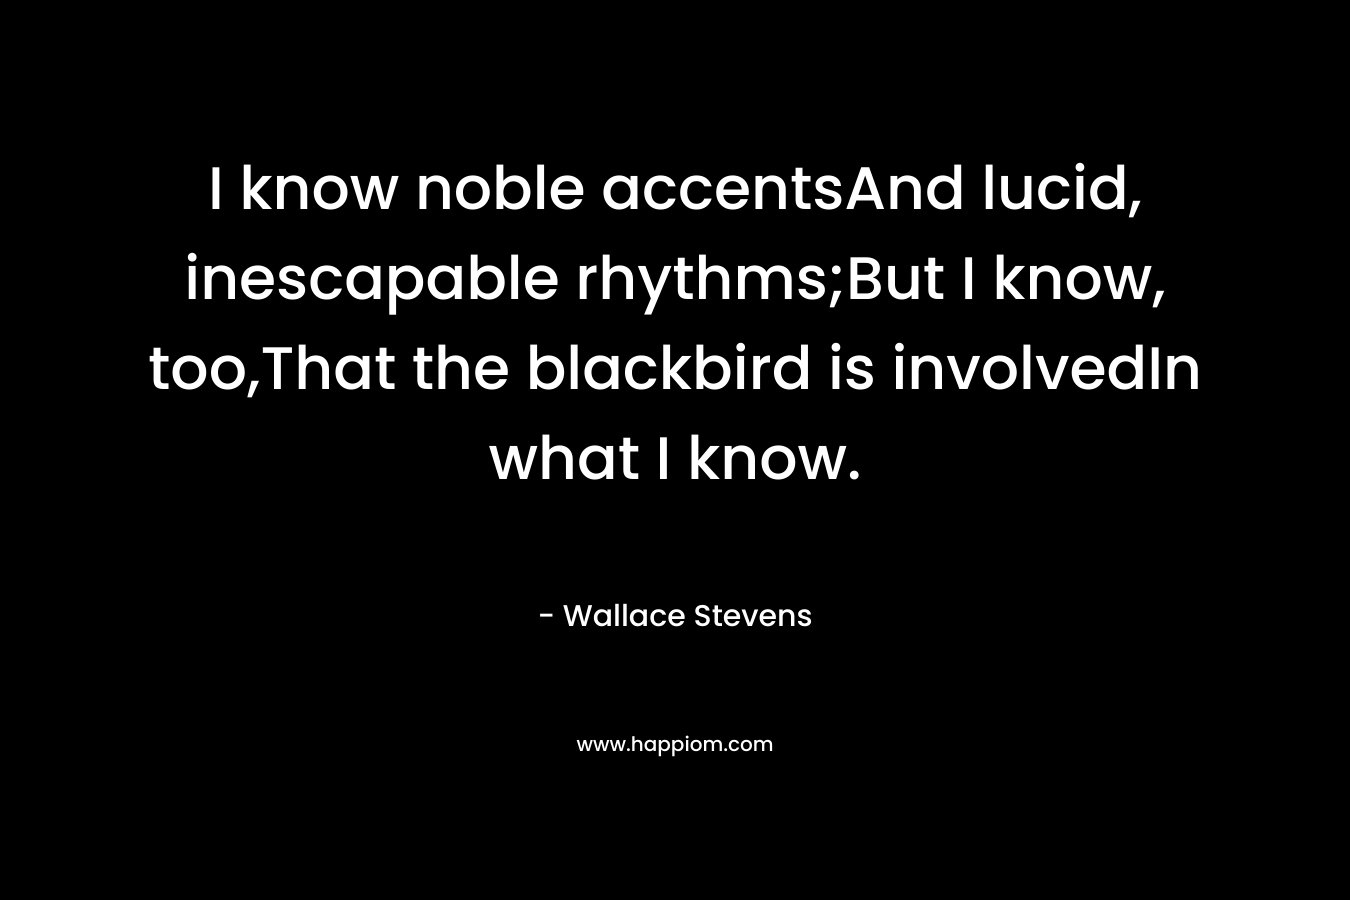 I know noble accentsAnd lucid, inescapable rhythms;But I know, too,That the blackbird is involvedIn what I know. – Wallace Stevens